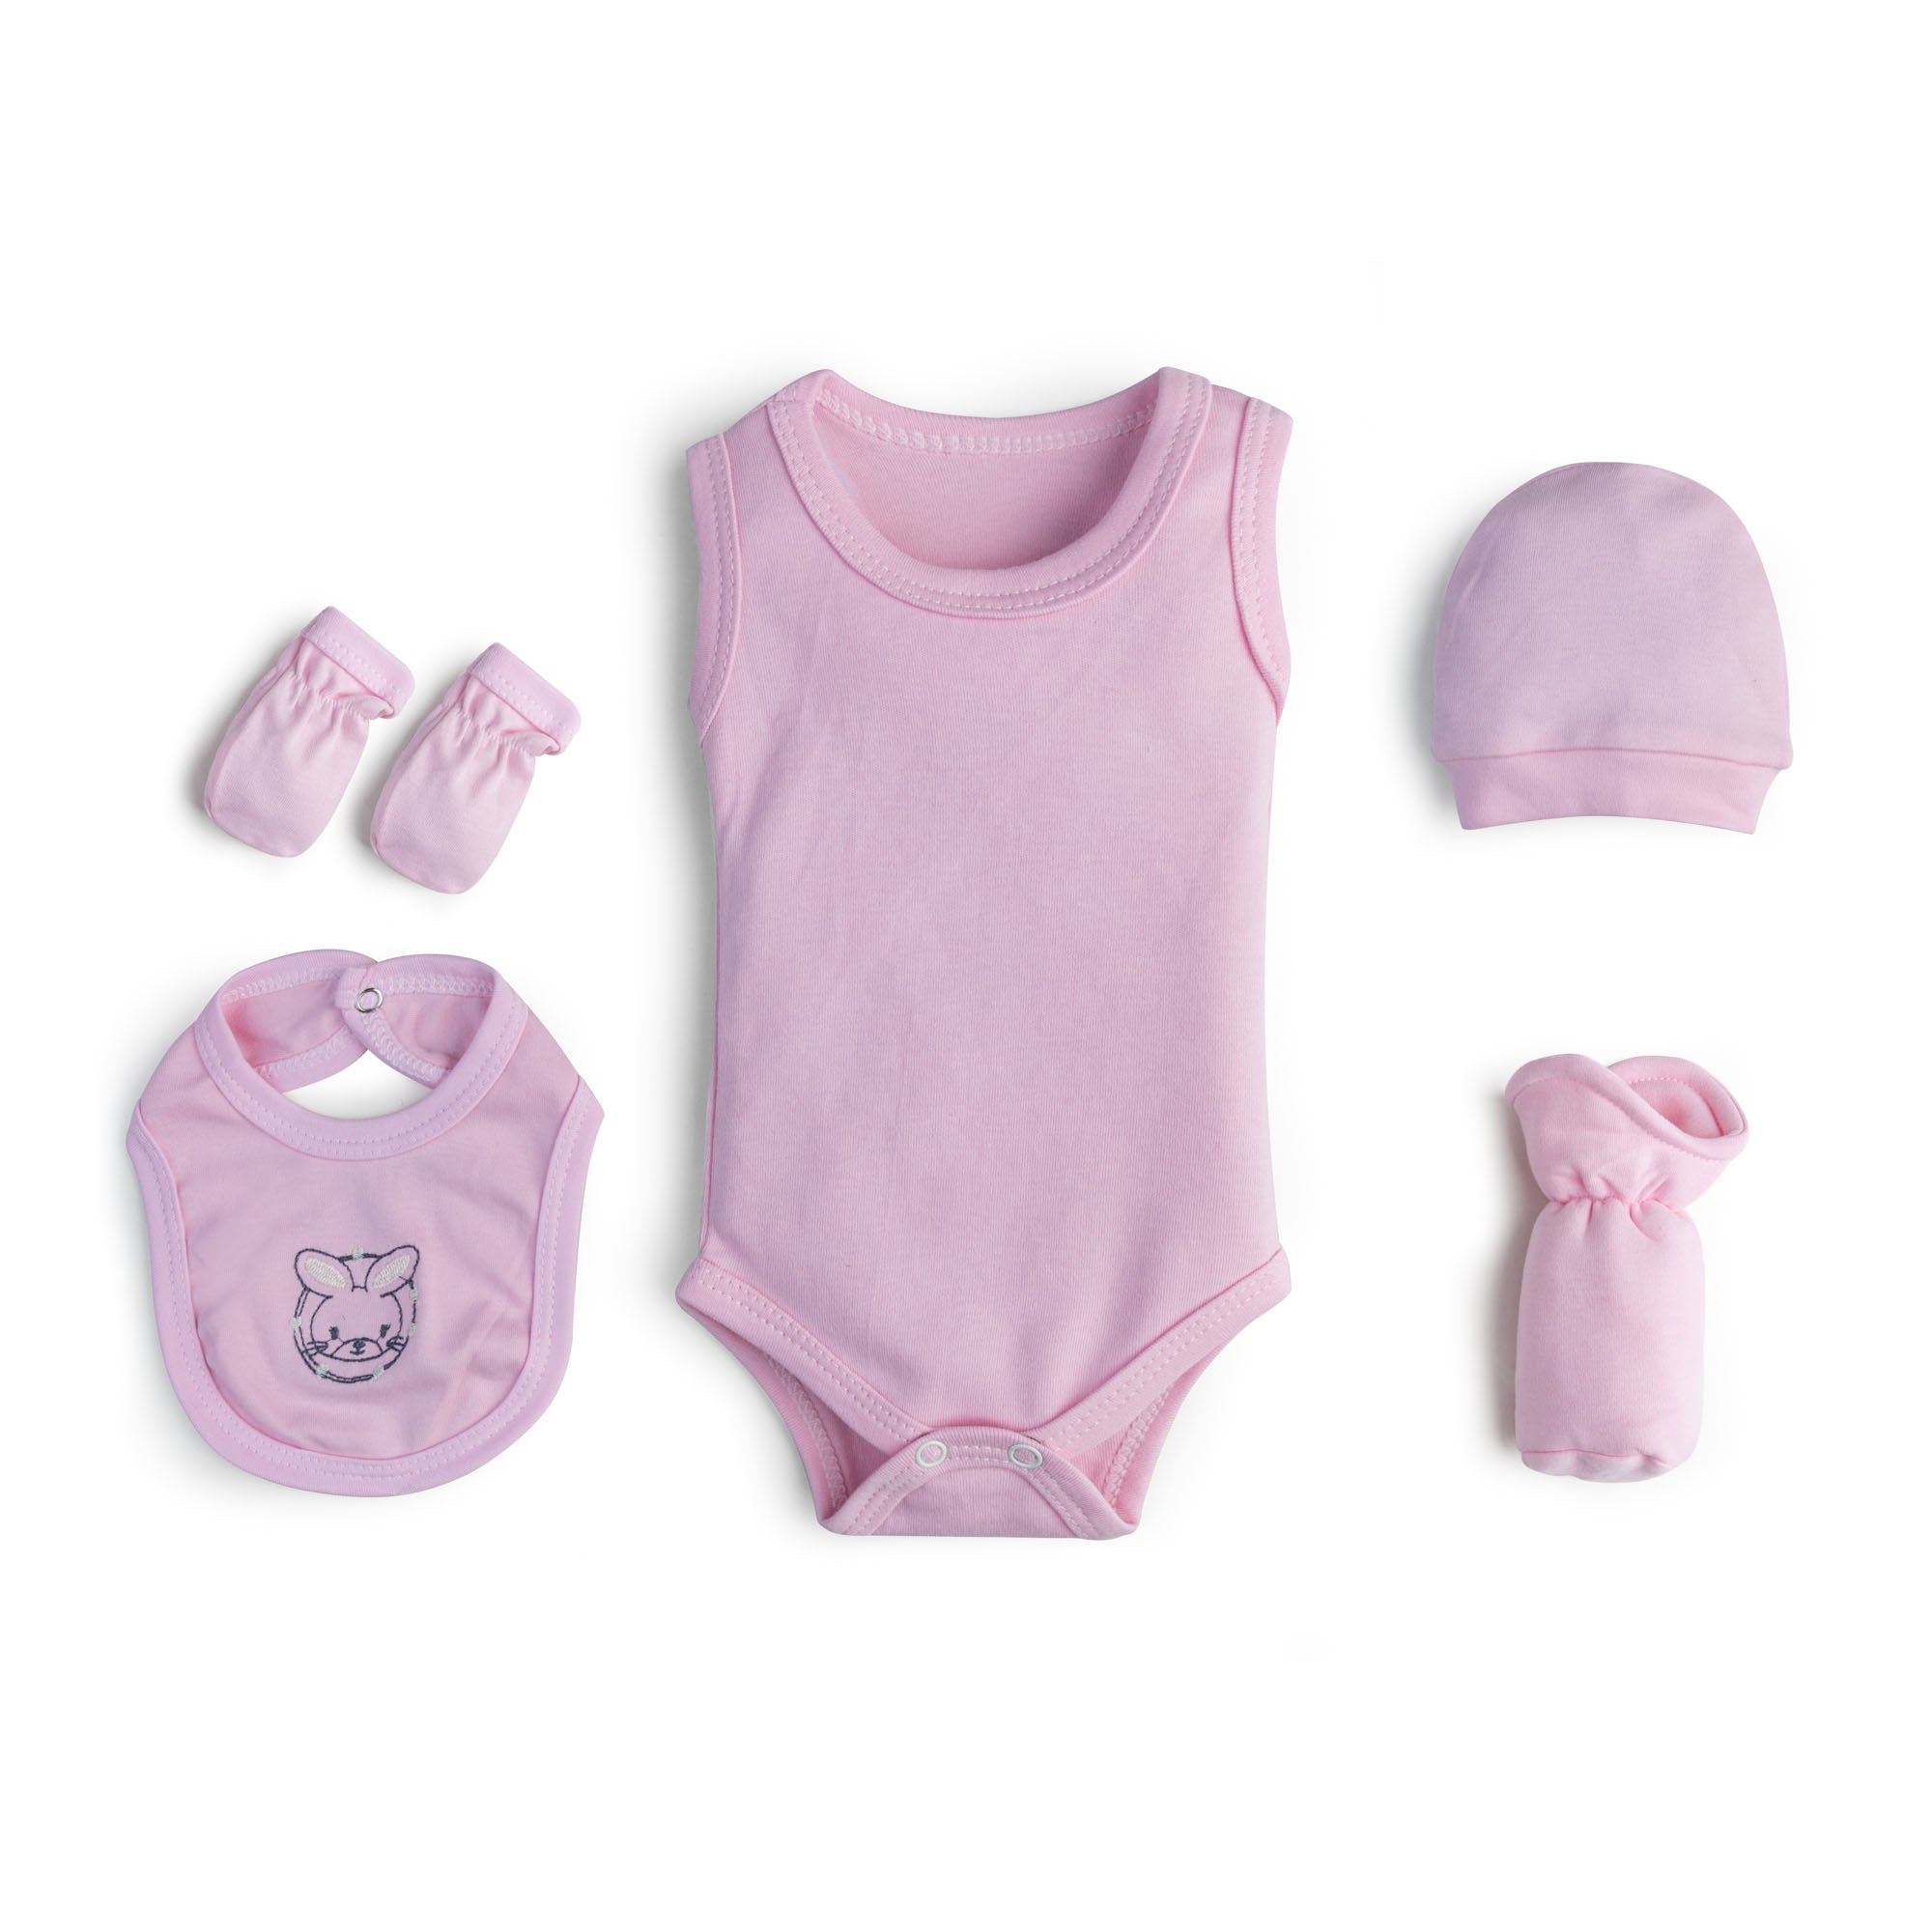 Meow Pink Infant 7-Pack